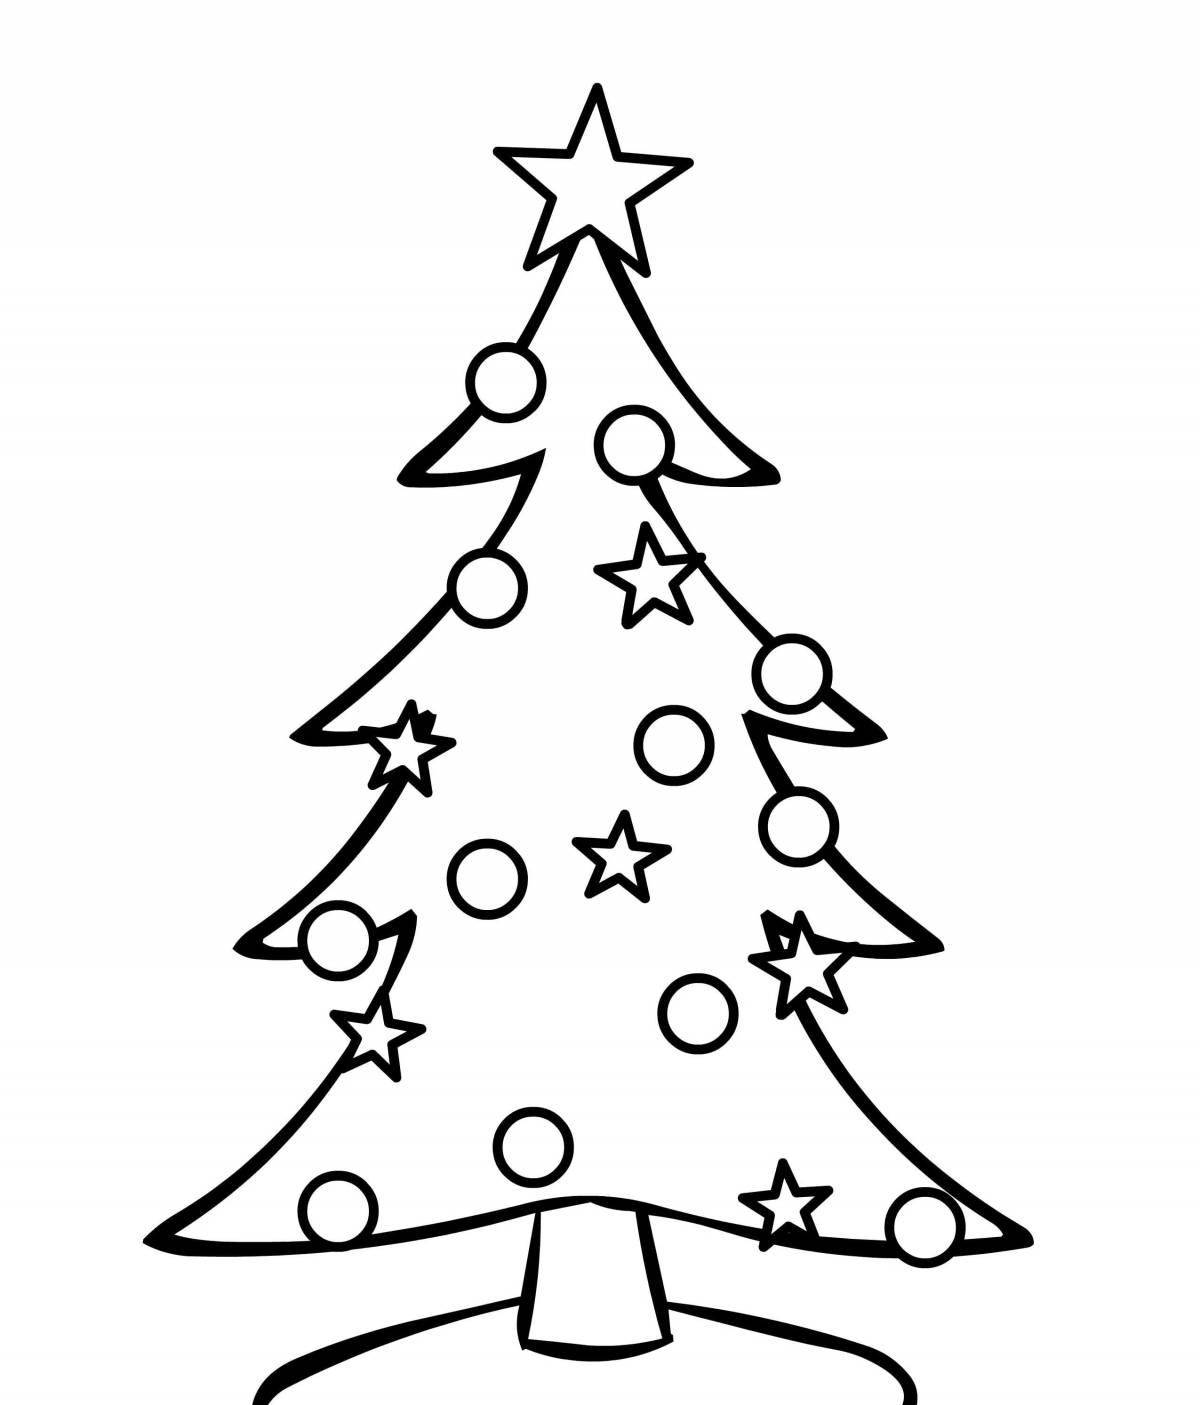 Exciting drawing of a Christmas tree